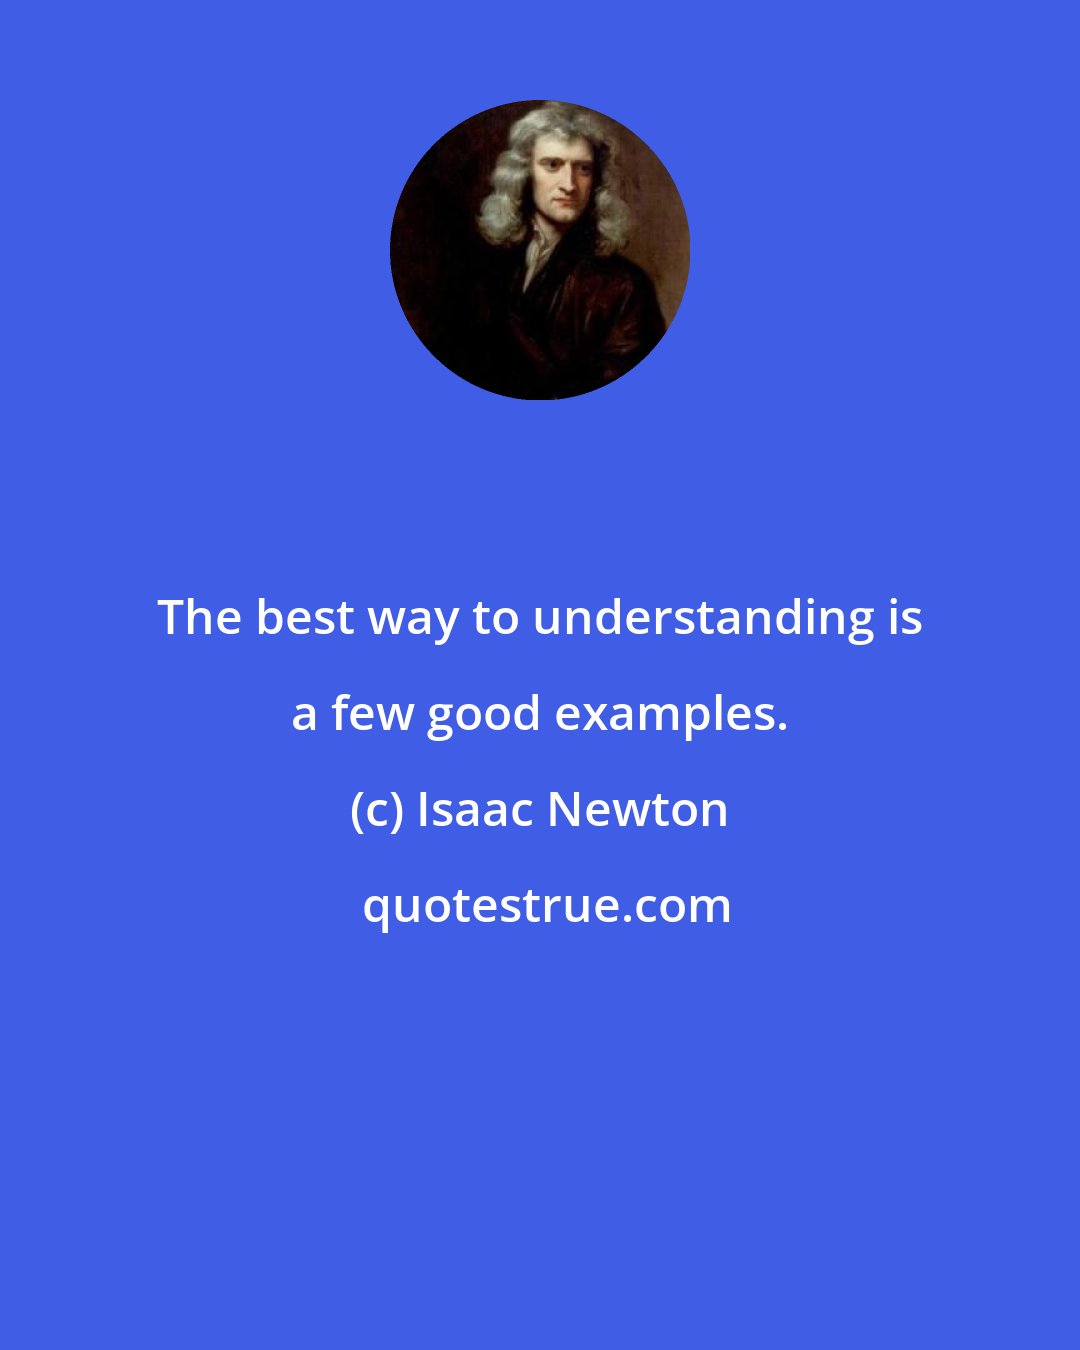 Isaac Newton: The best way to understanding is a few good examples.